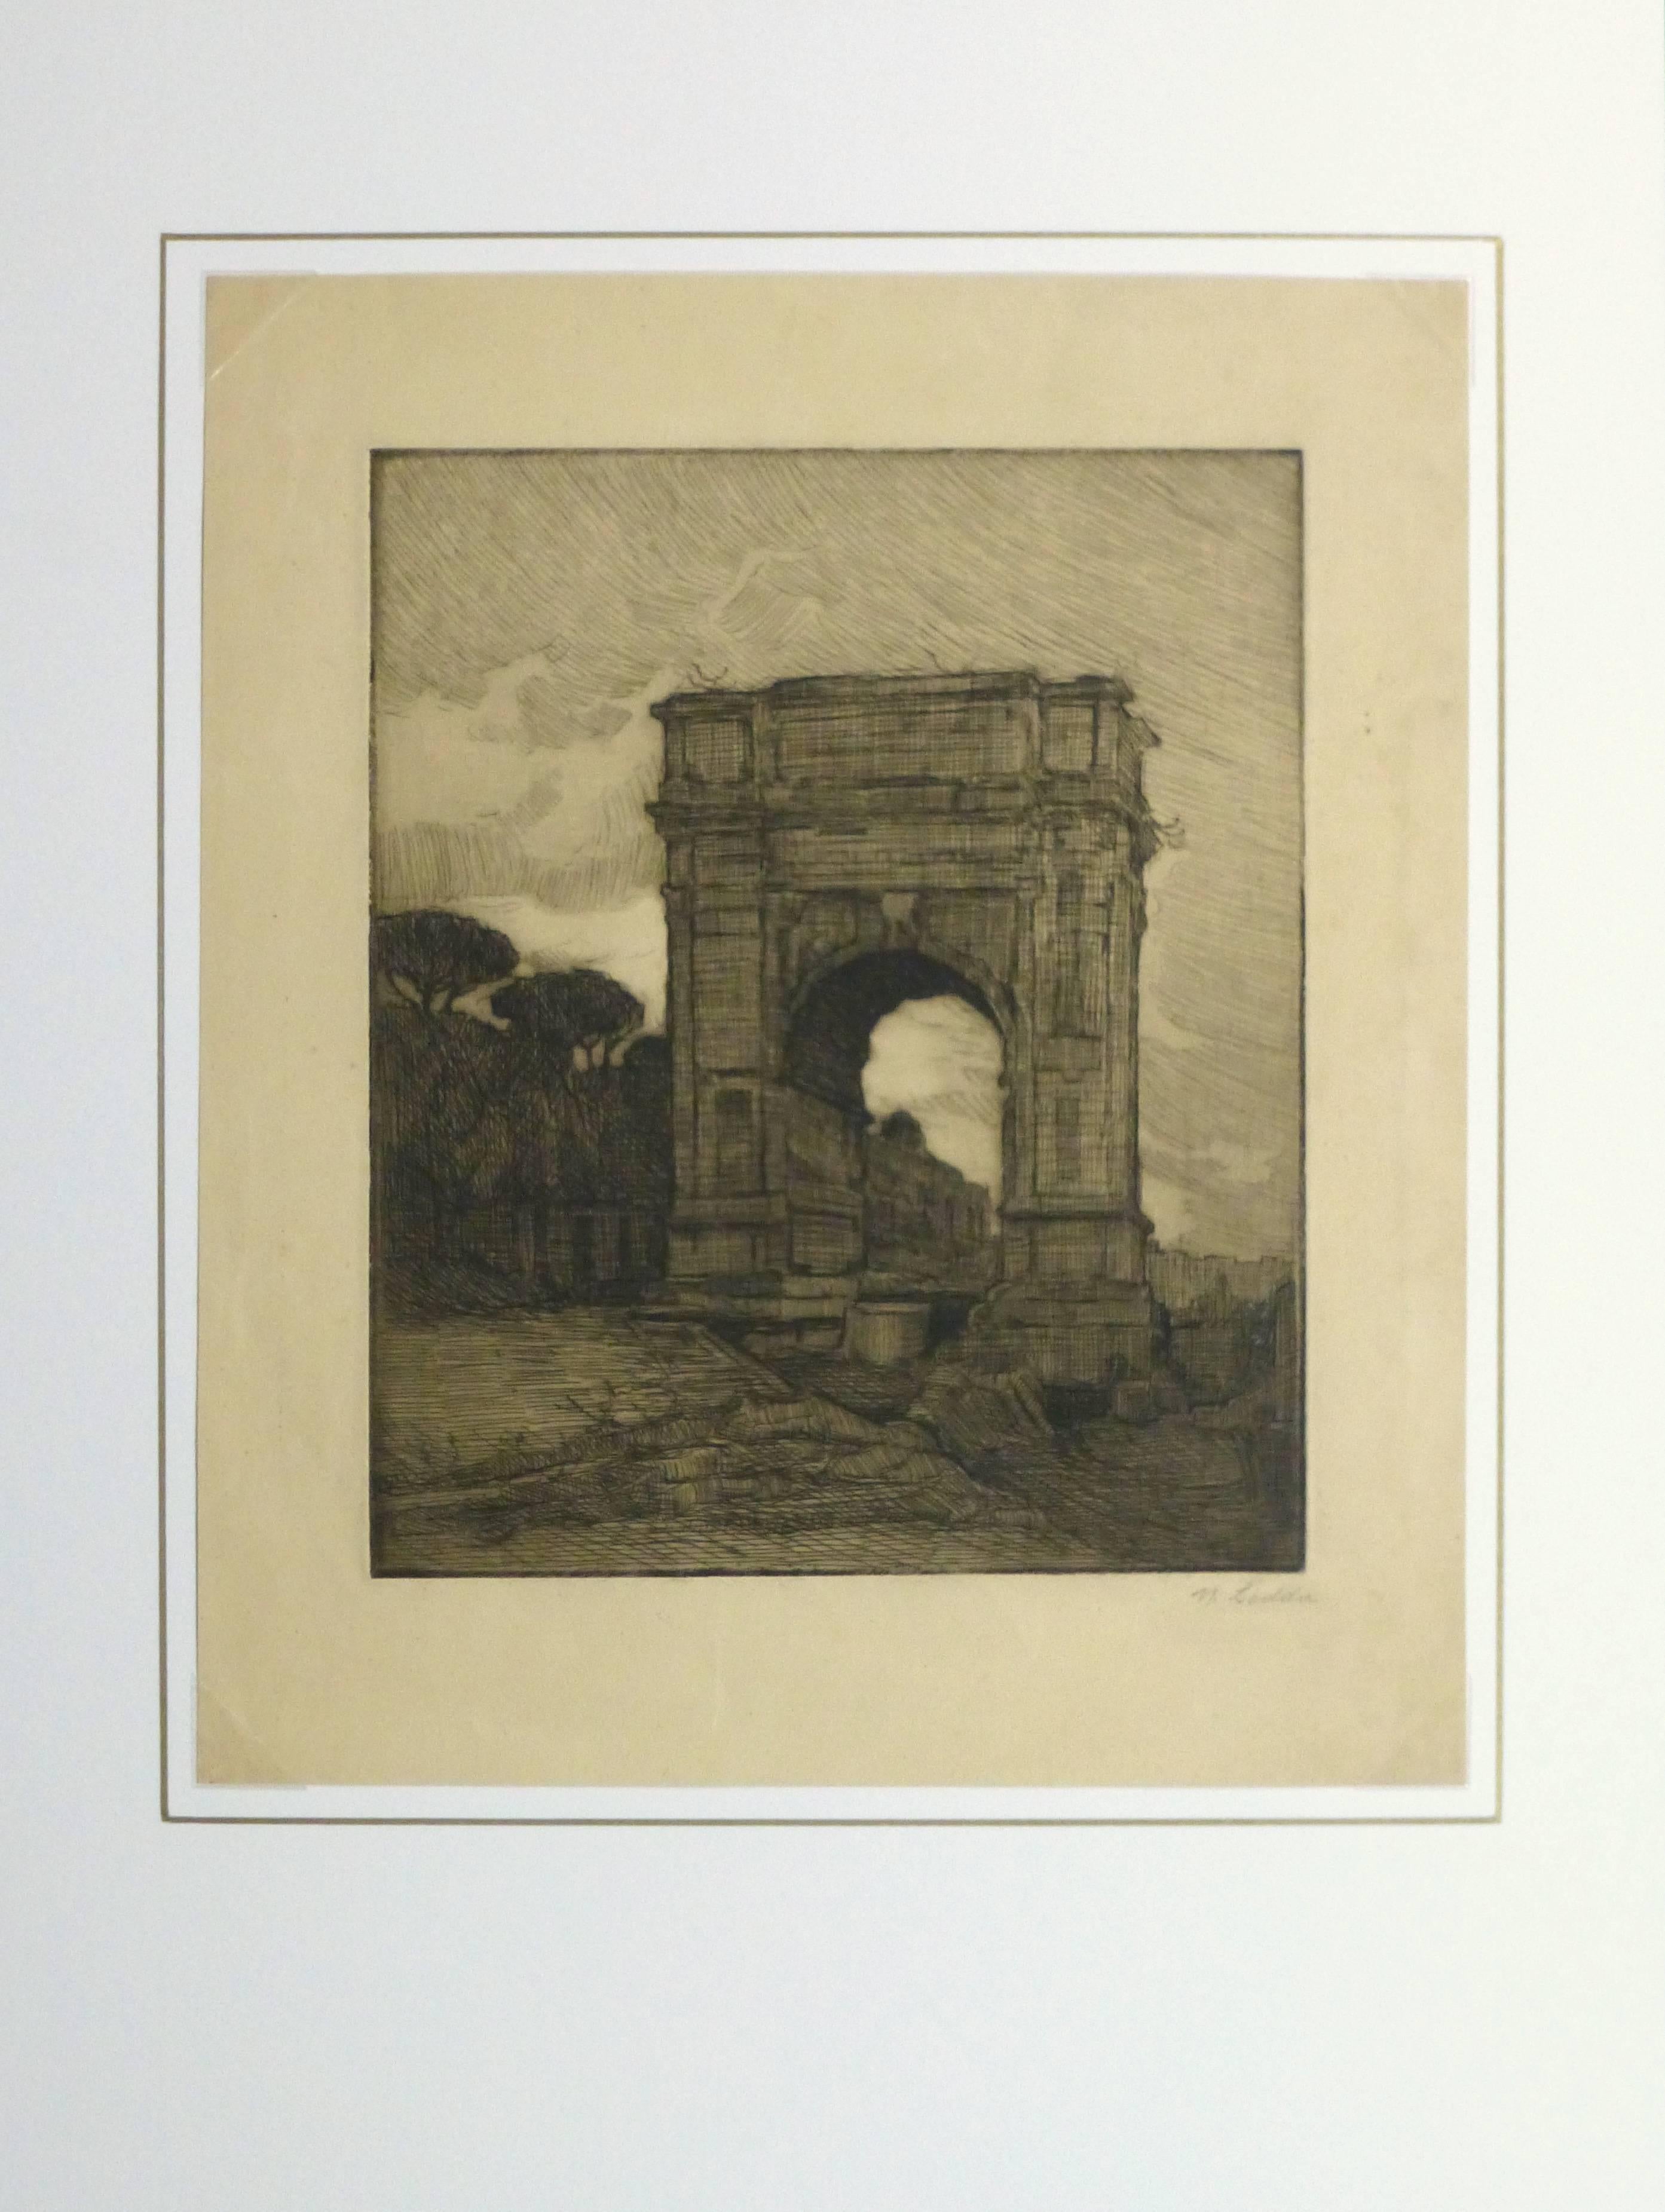 Etching - Regal Remains - Brown Landscape Print by Unknown